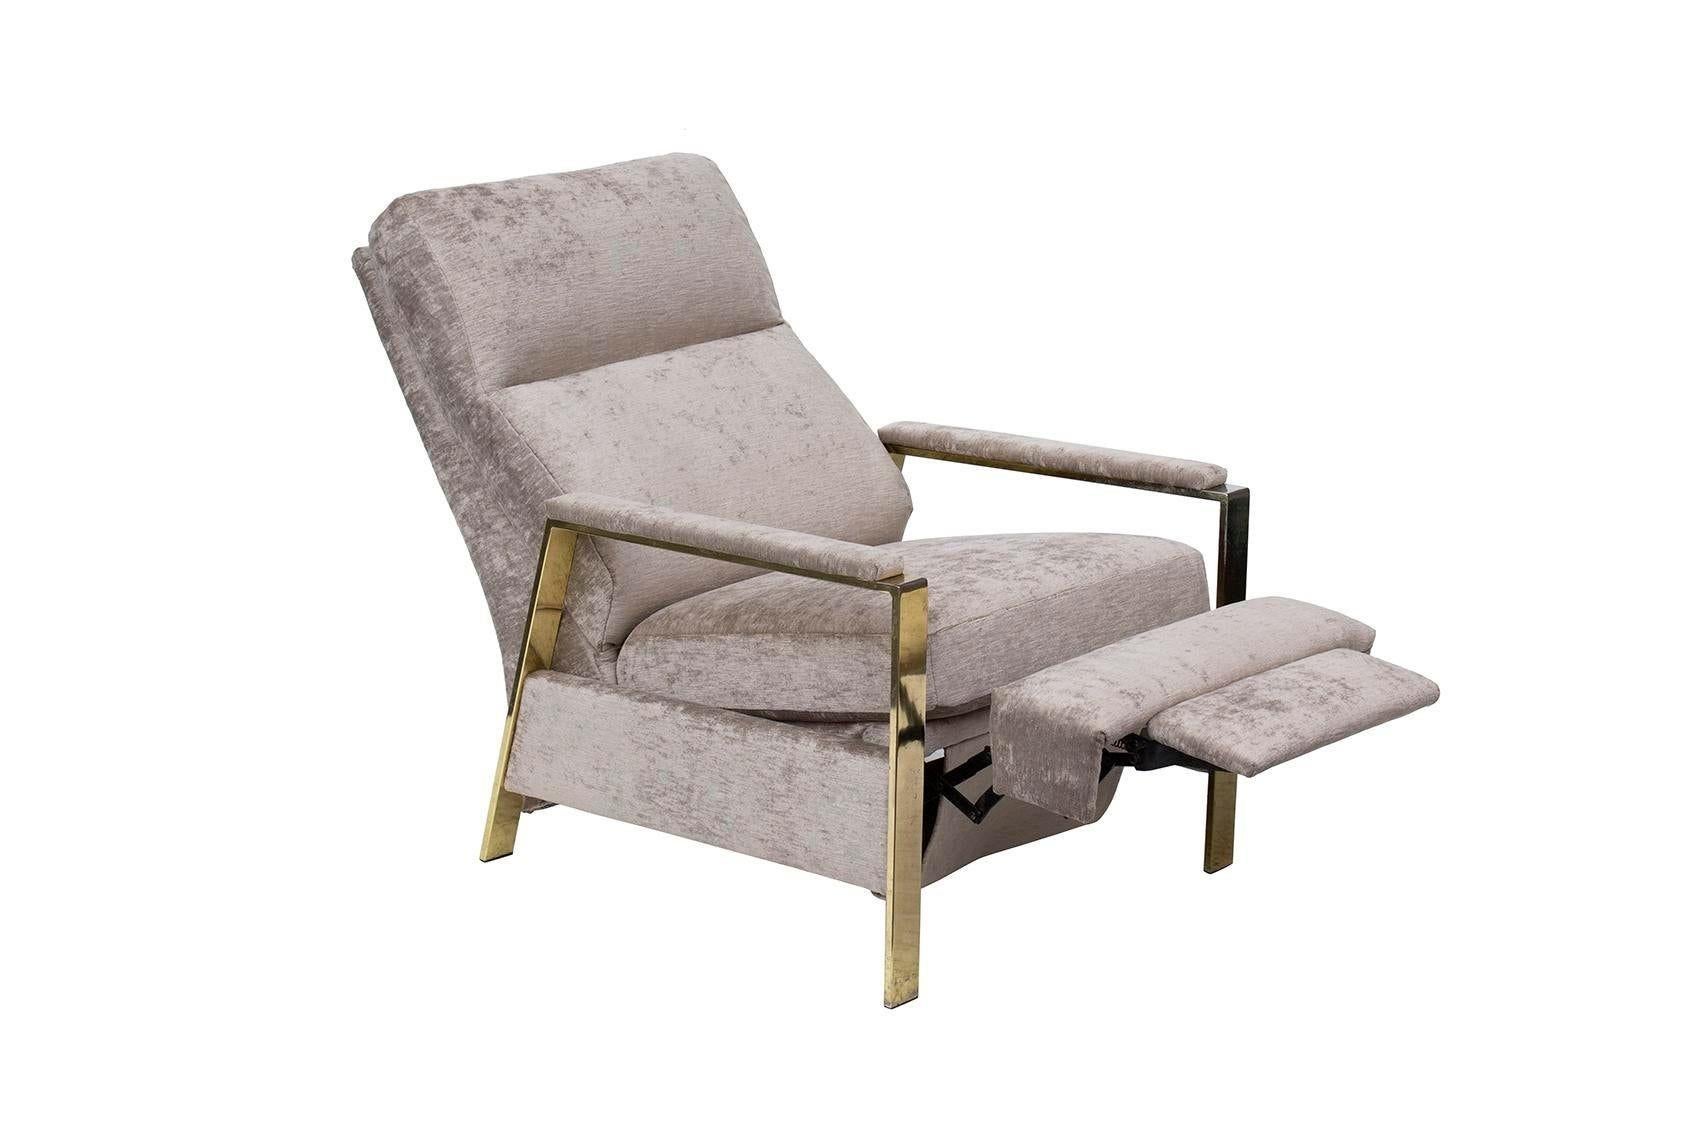 USA, 1980s
Milo Baughman-style reclining armchair with an angular goldtone frame. This chair has been newly reupholstered in a silvery grey slubby silk / cotton textured velvet. Label on underside says it is made by Bradington Young. This is a